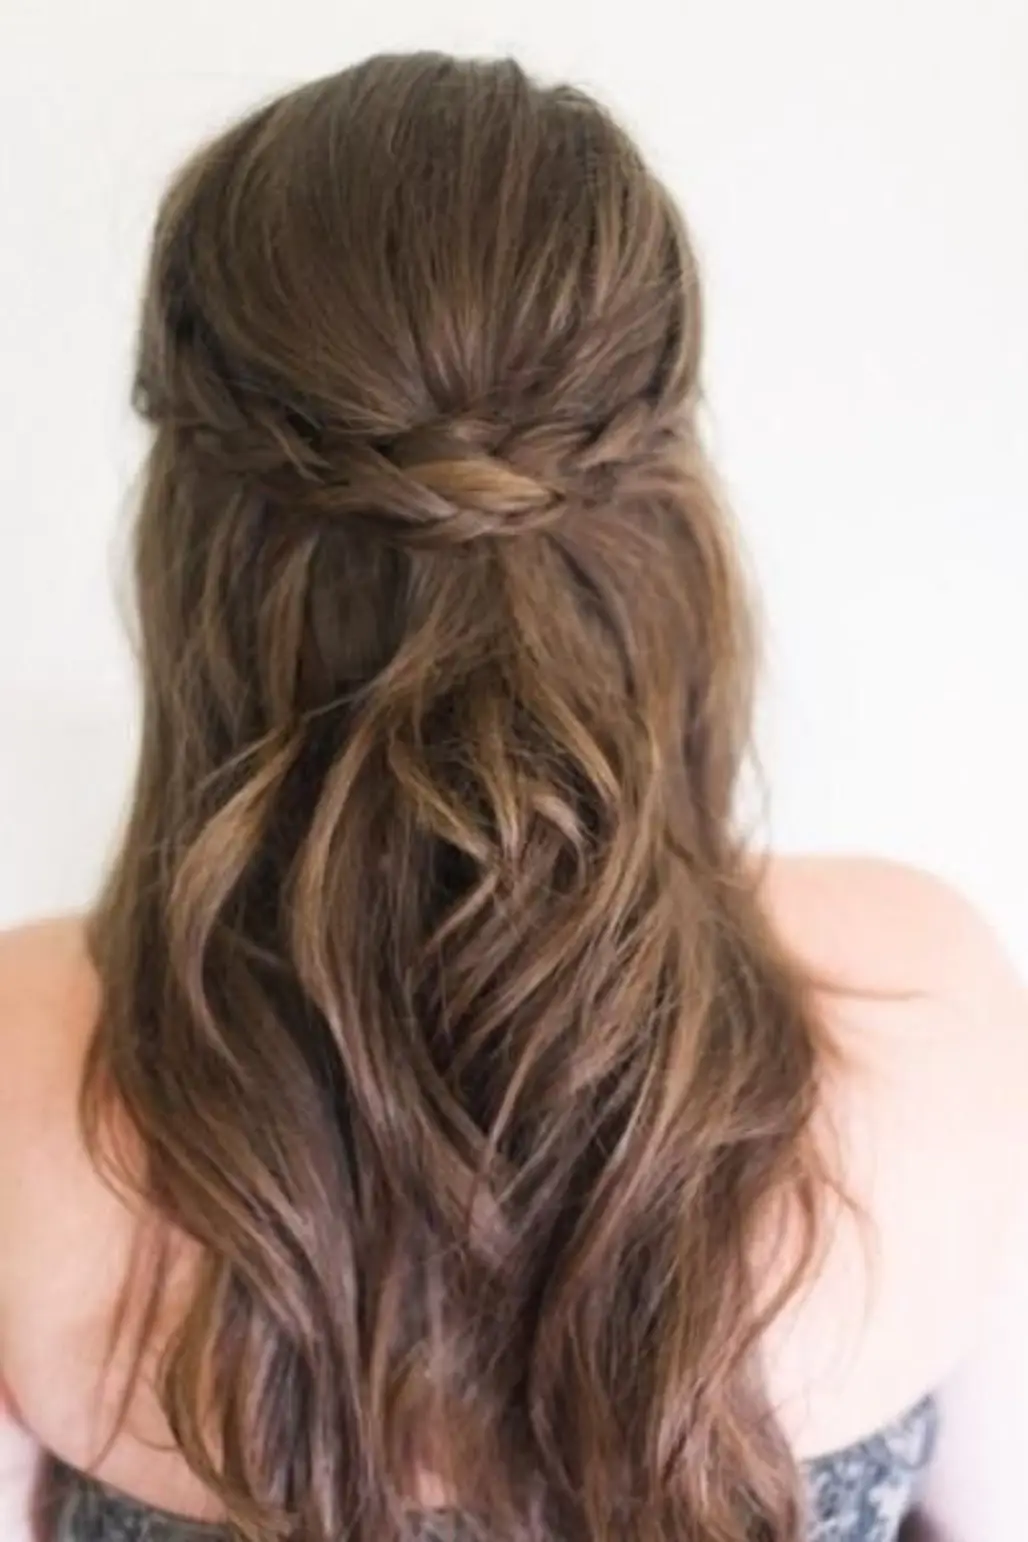 With a Crown Braid